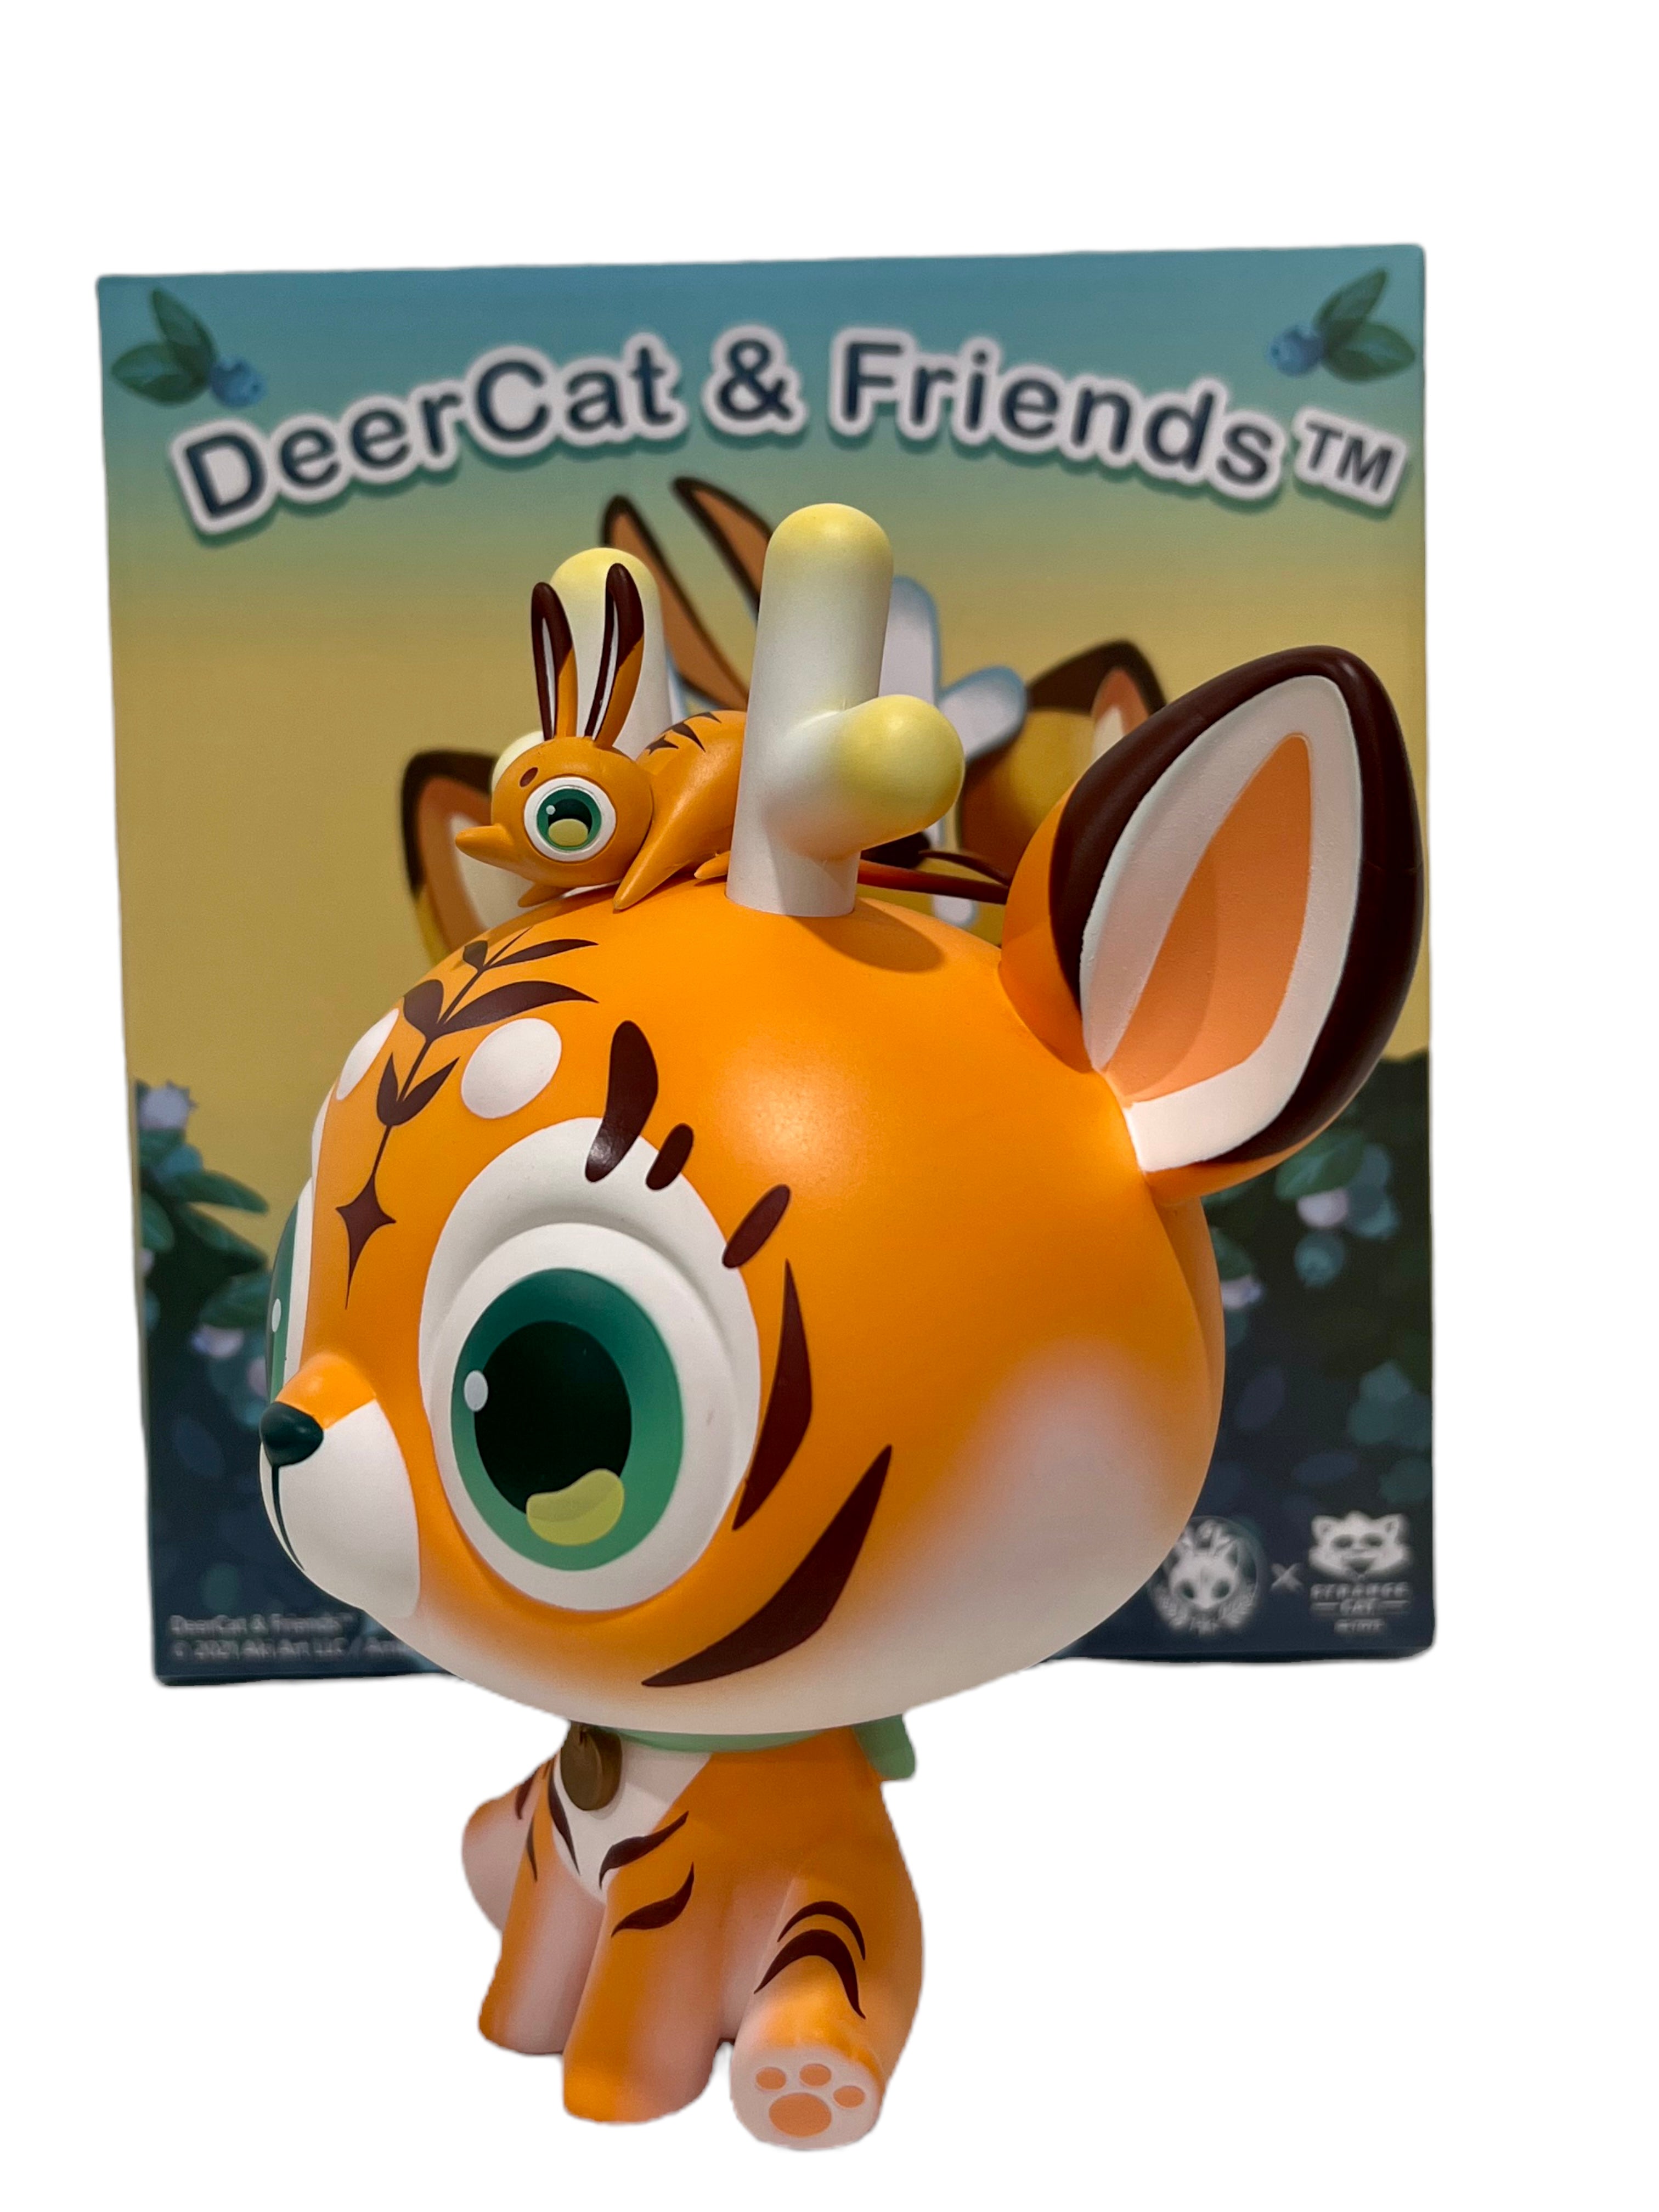 DeerCat & Friends - Tiger Edition By Amber Aki Huang